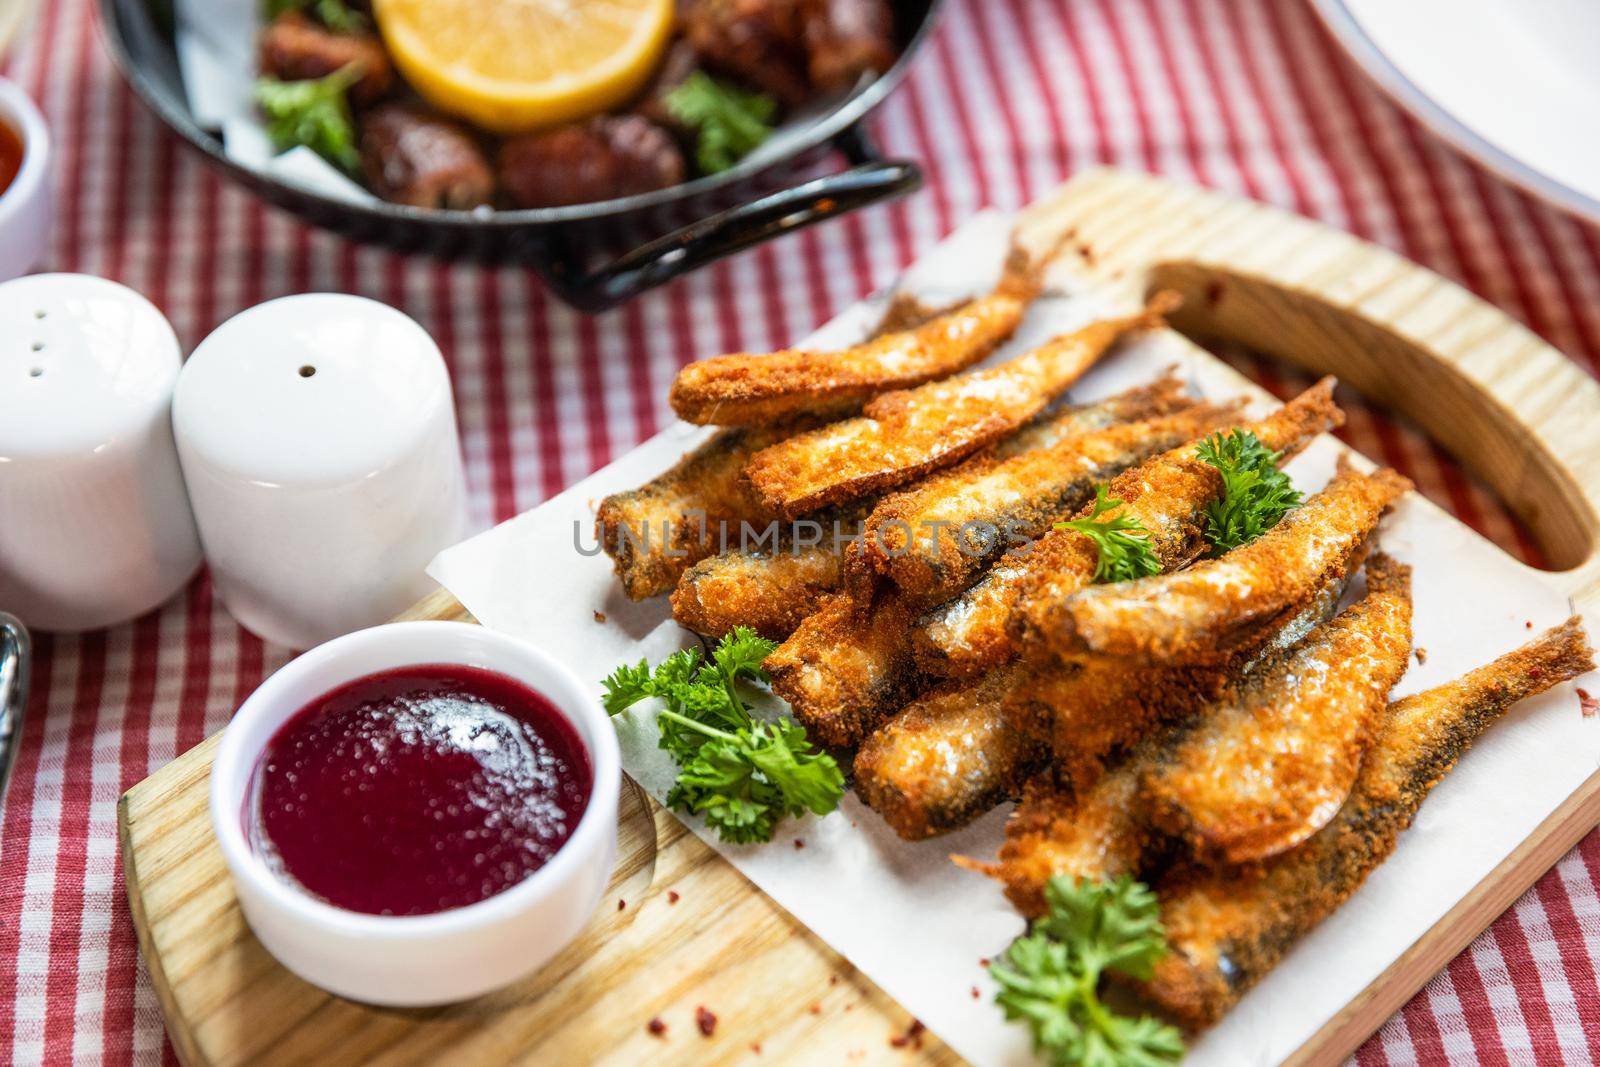 Kilka, Sprat fish, ketchup and other snacks close up by ferhad